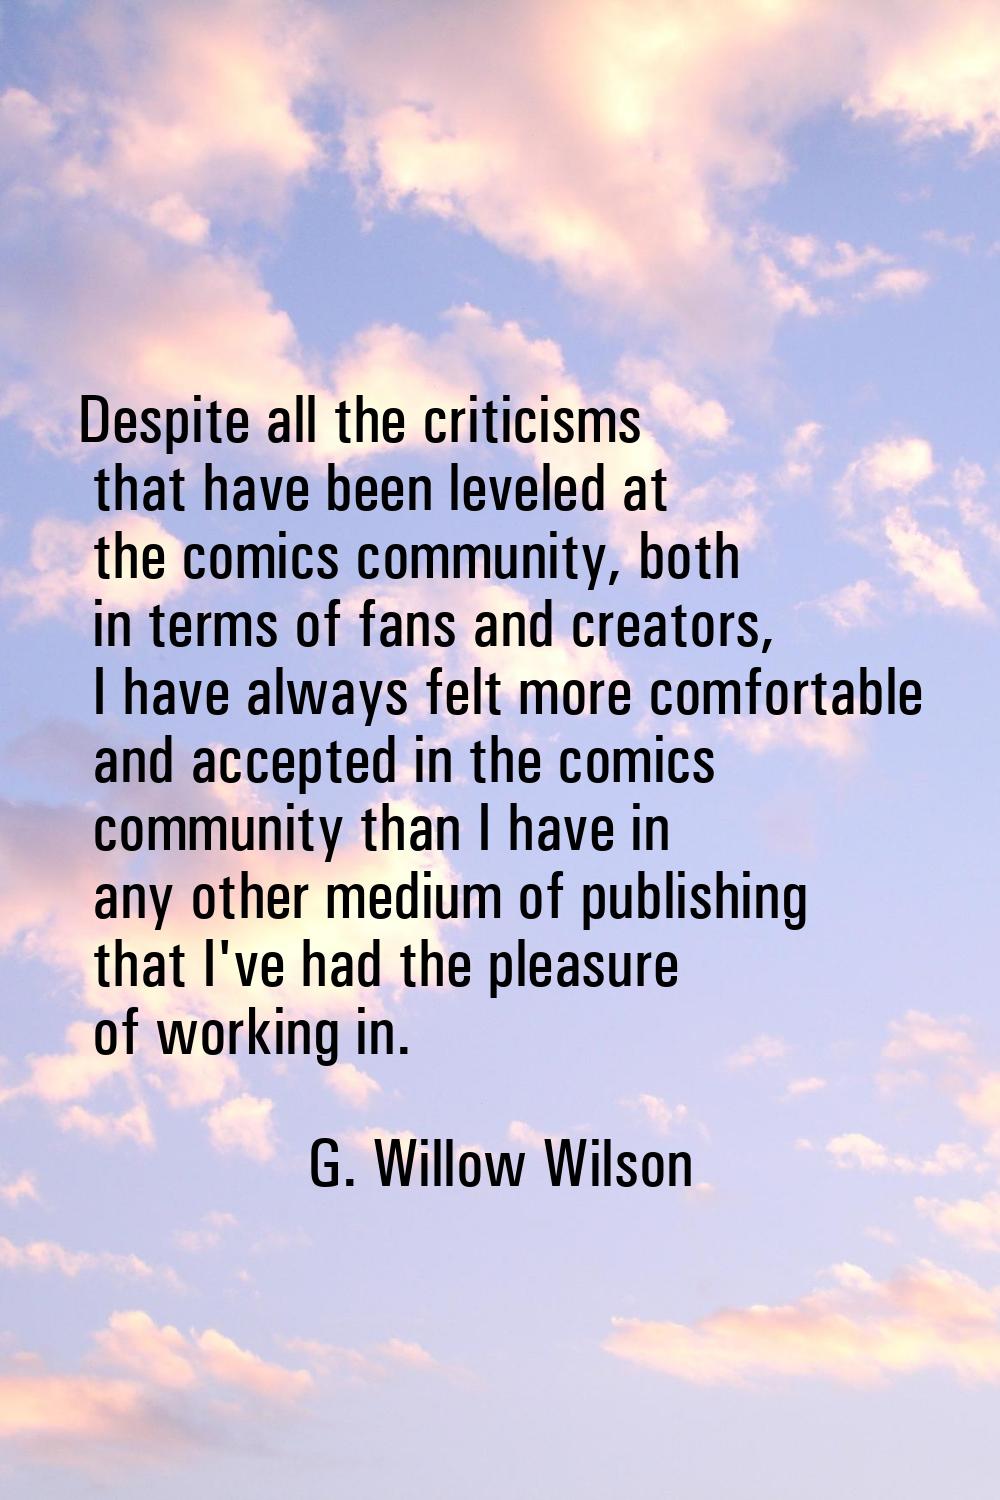 Despite all the criticisms that have been leveled at the comics community, both in terms of fans an